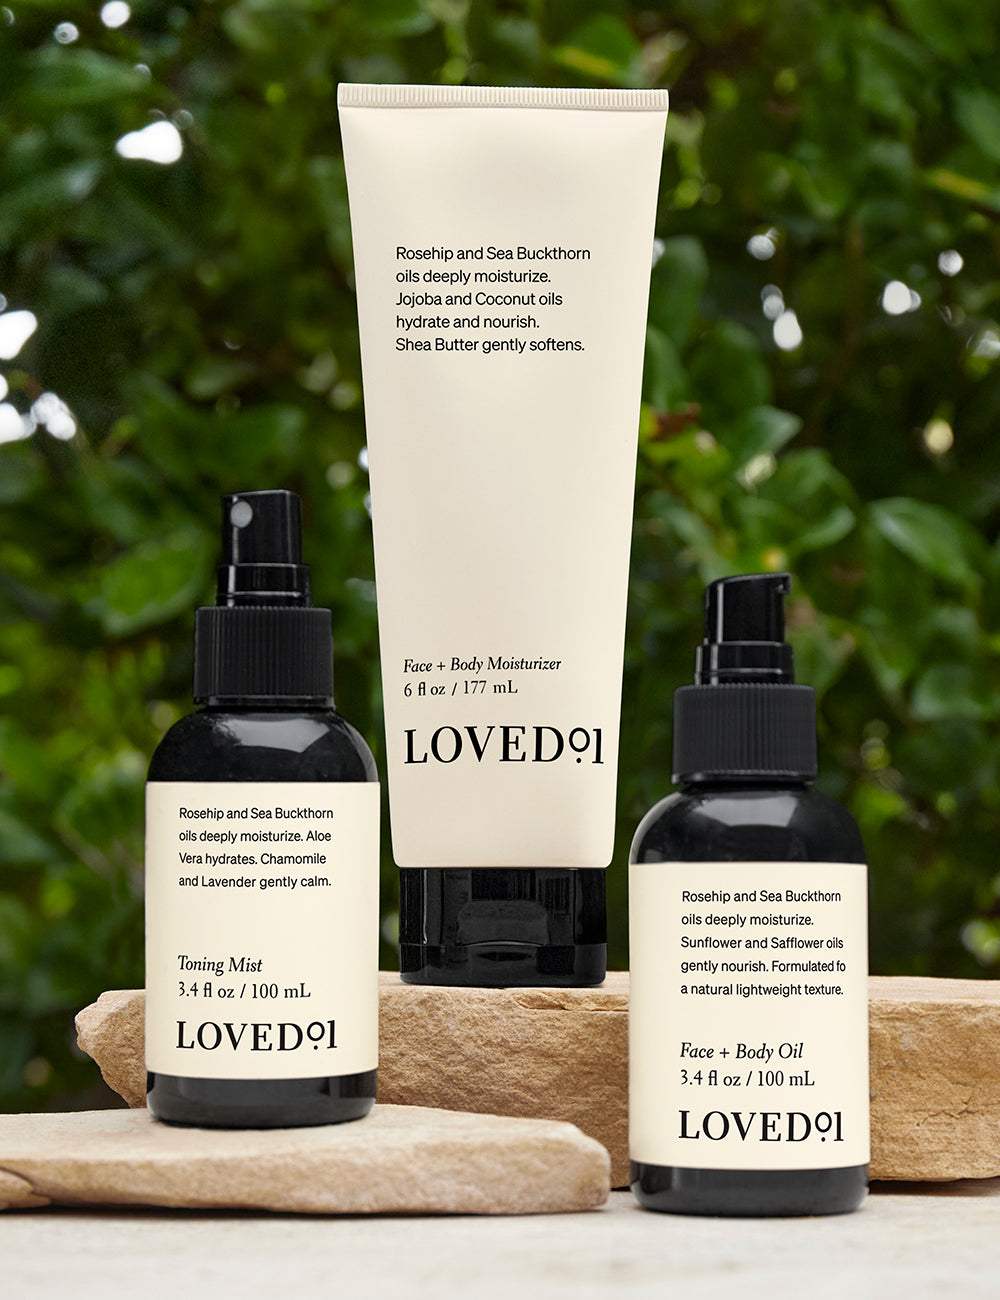 A collection of skincare products sitting on tan stones with green foliage in the background.